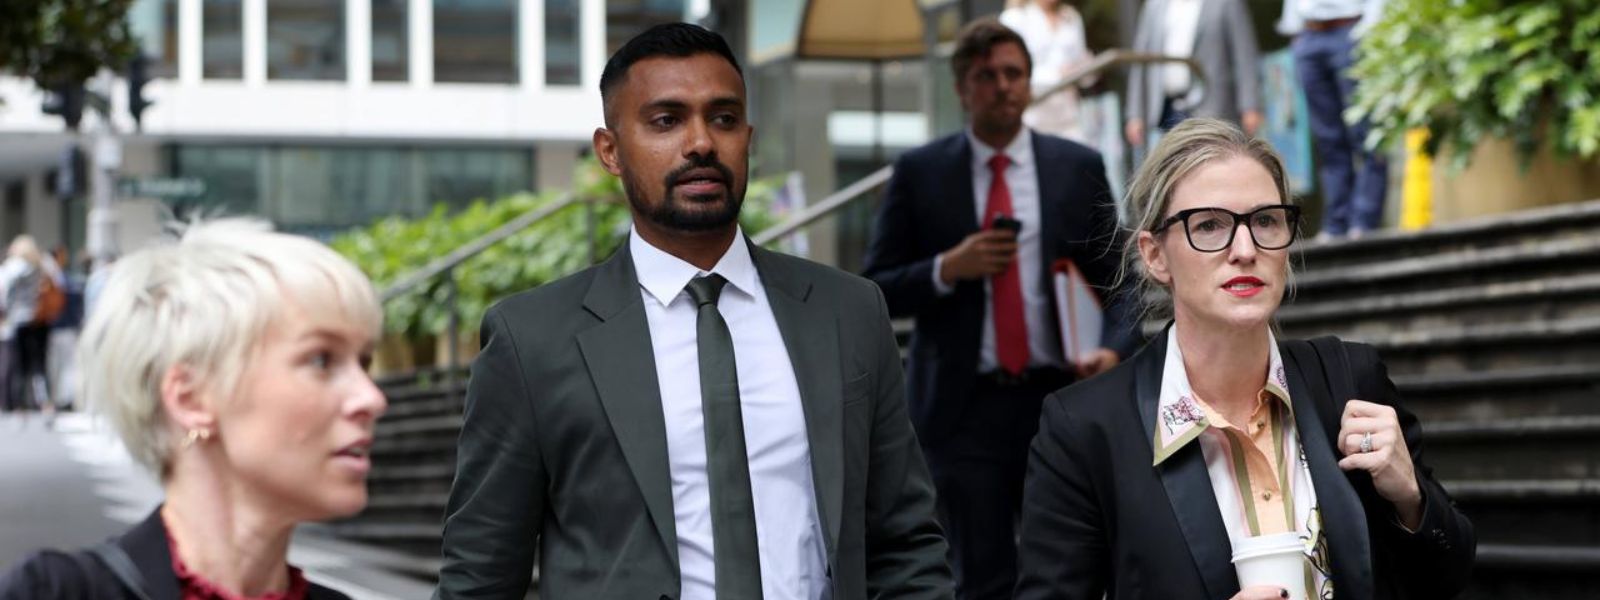 Cricketer Danushka Gunathilaka found not guilty of sexual intercourse without consent